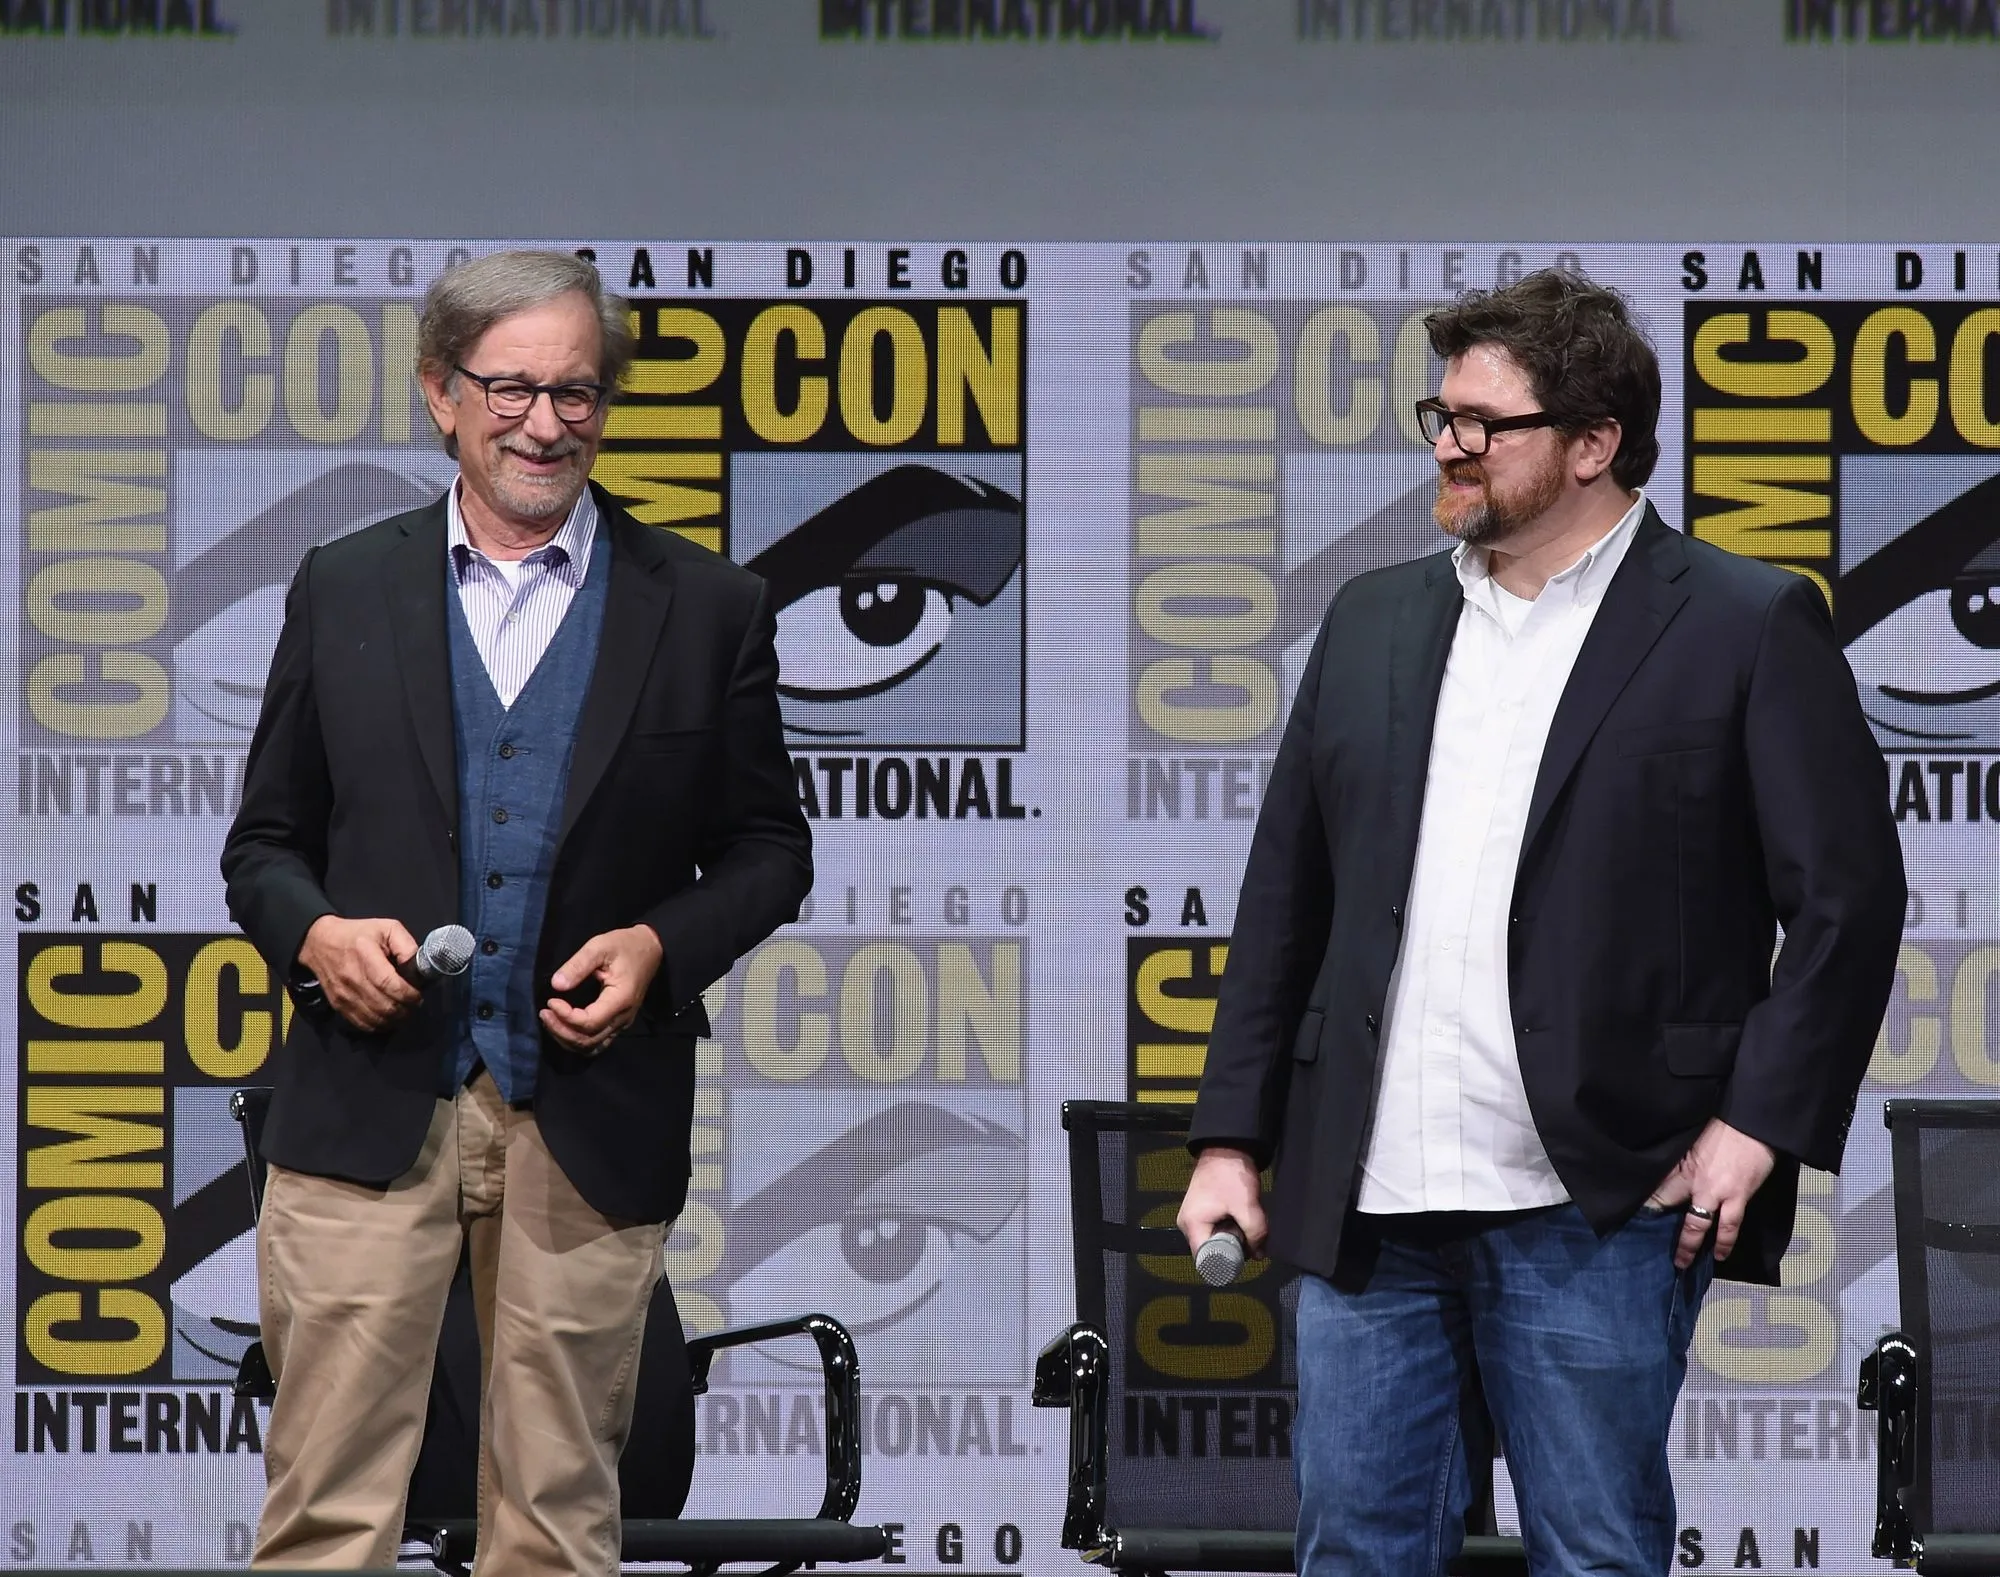 Ready player One's author Ernest Cline with director Steven Spielberg at San Diego's
Comic Con, 2018.